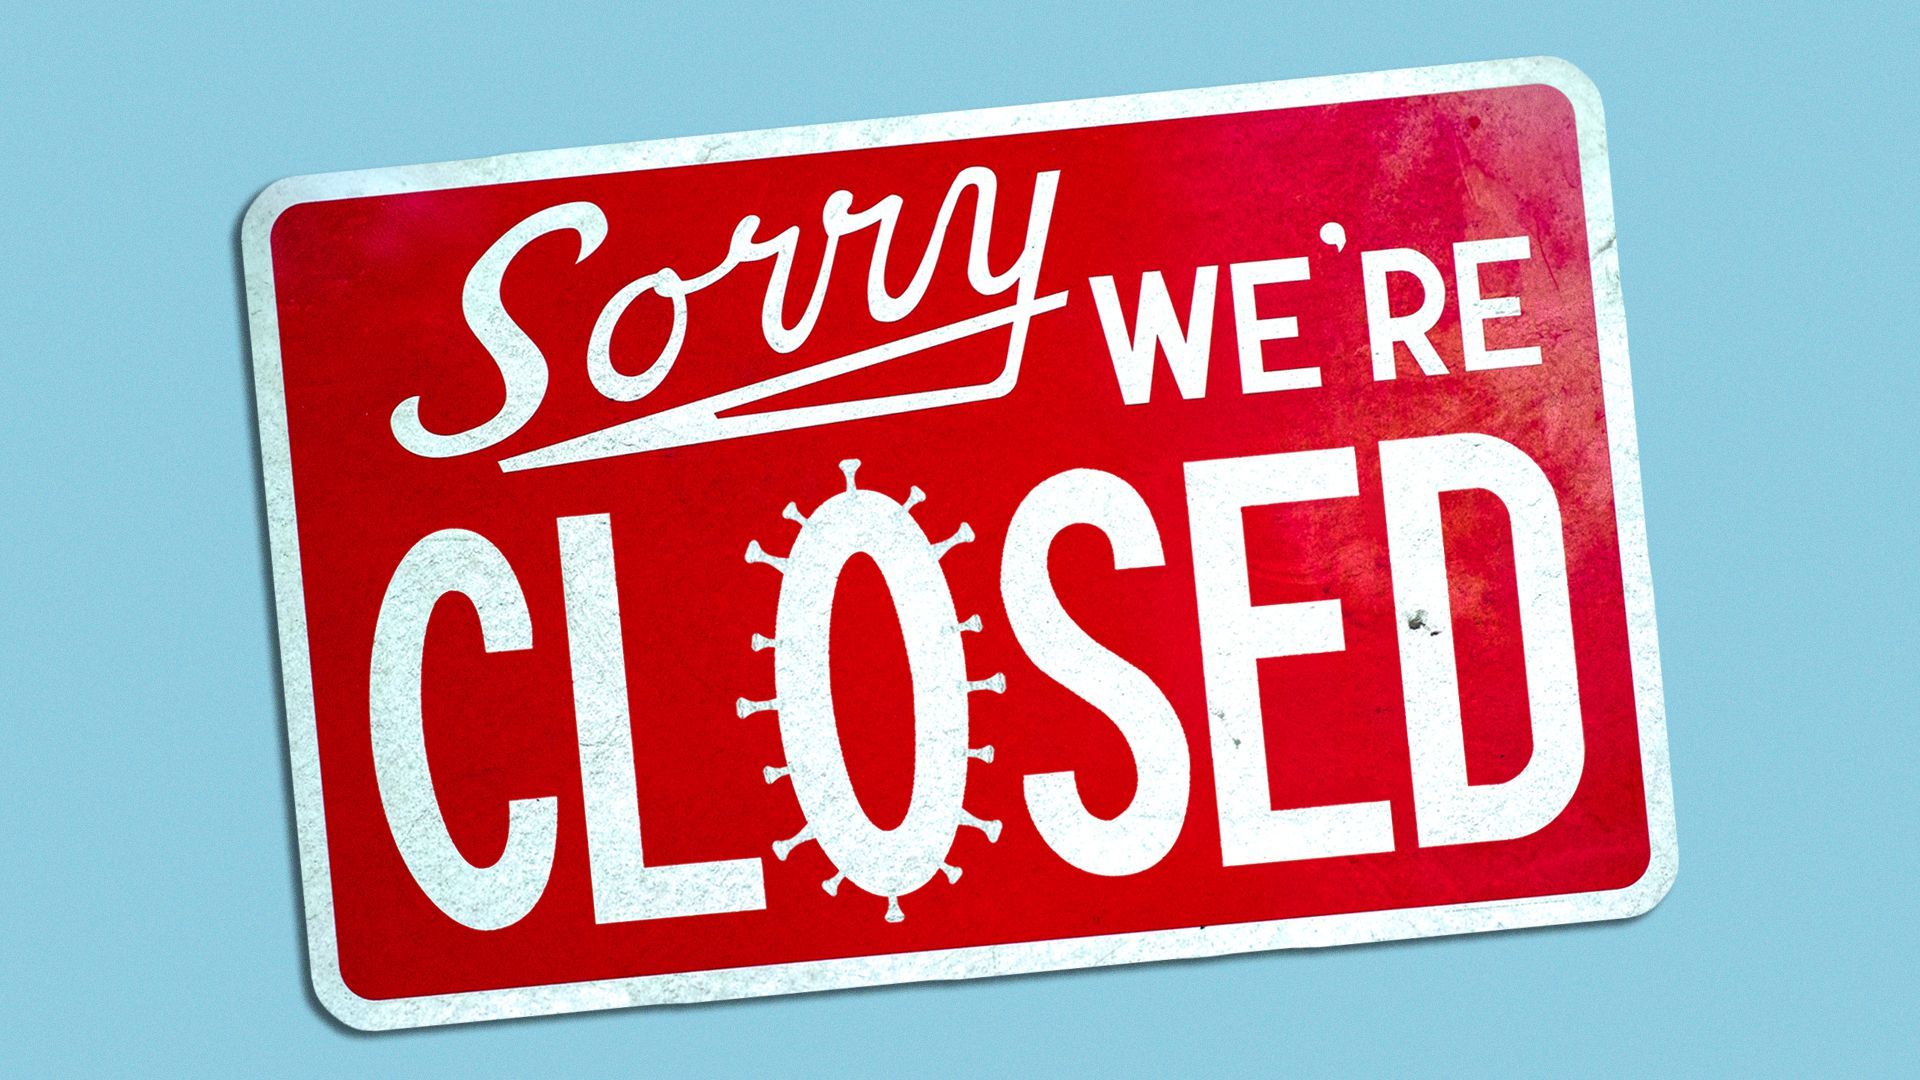 Illustration of a sign saying "Sorry, we're closed" but the O has COVID-19 spikes.